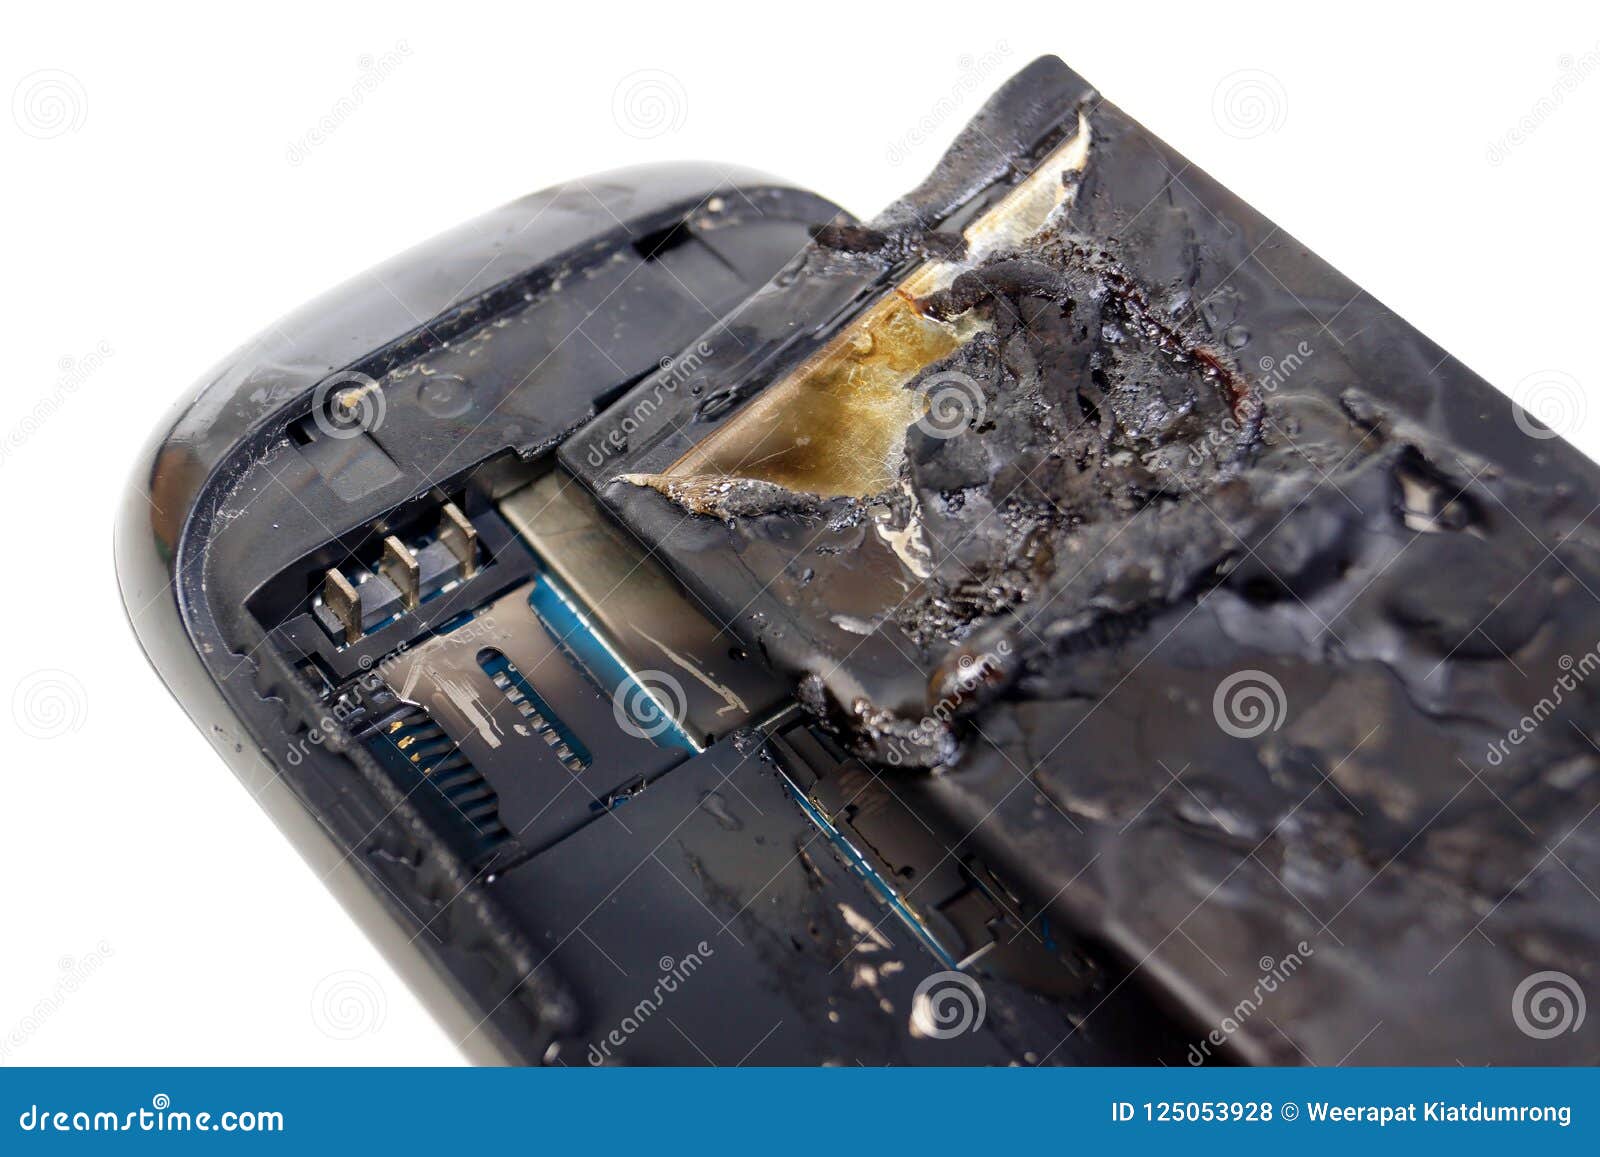 One more iPhone battery explodes at Apple store - Technology - Business ...